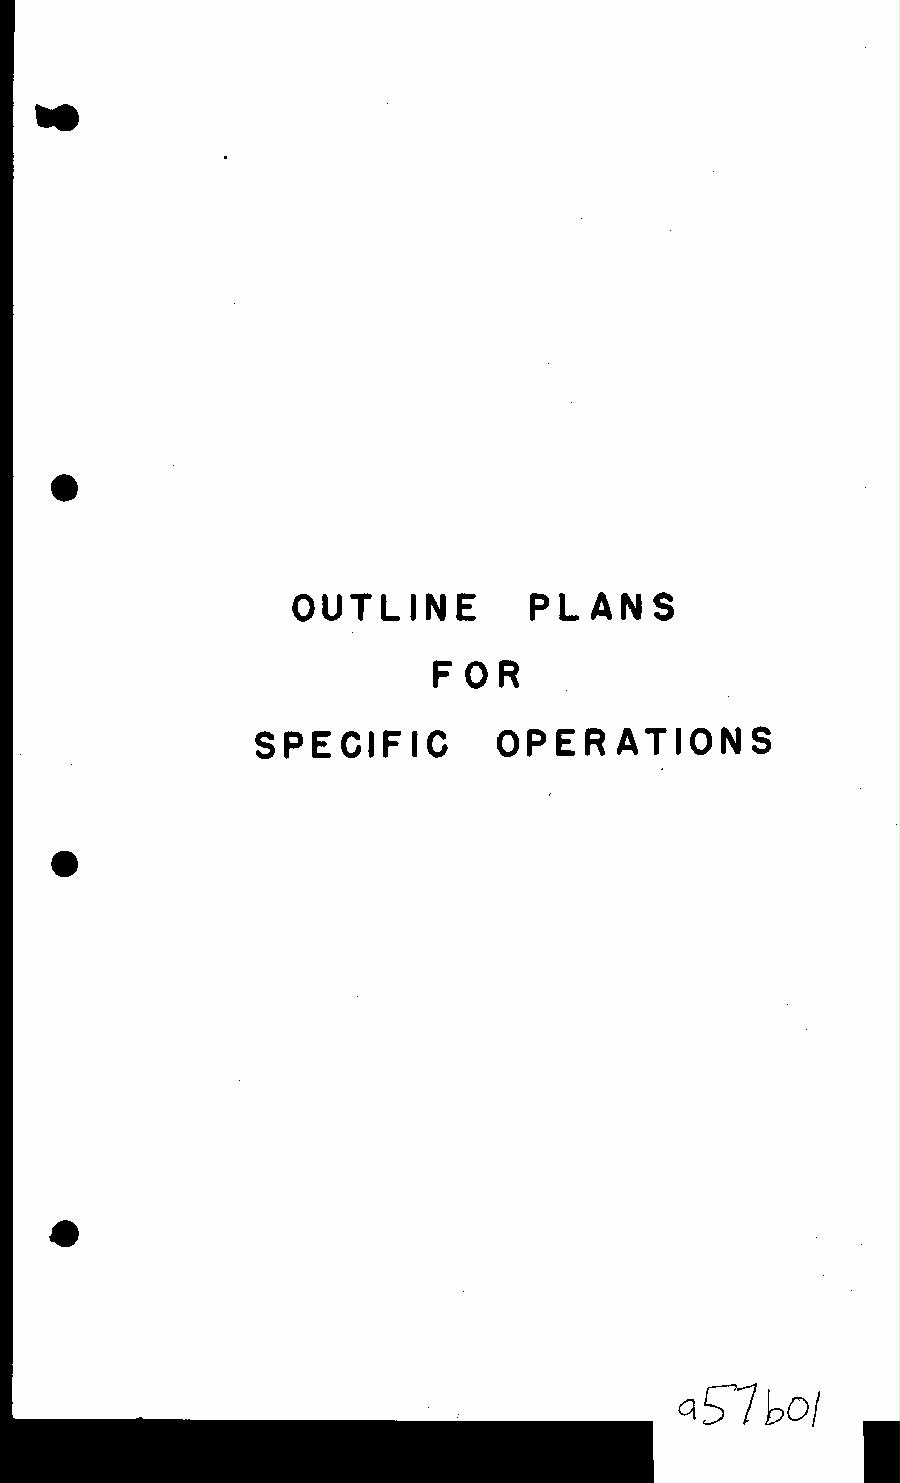 [a57b01.jpg] - Outline Plans for Specific Operations